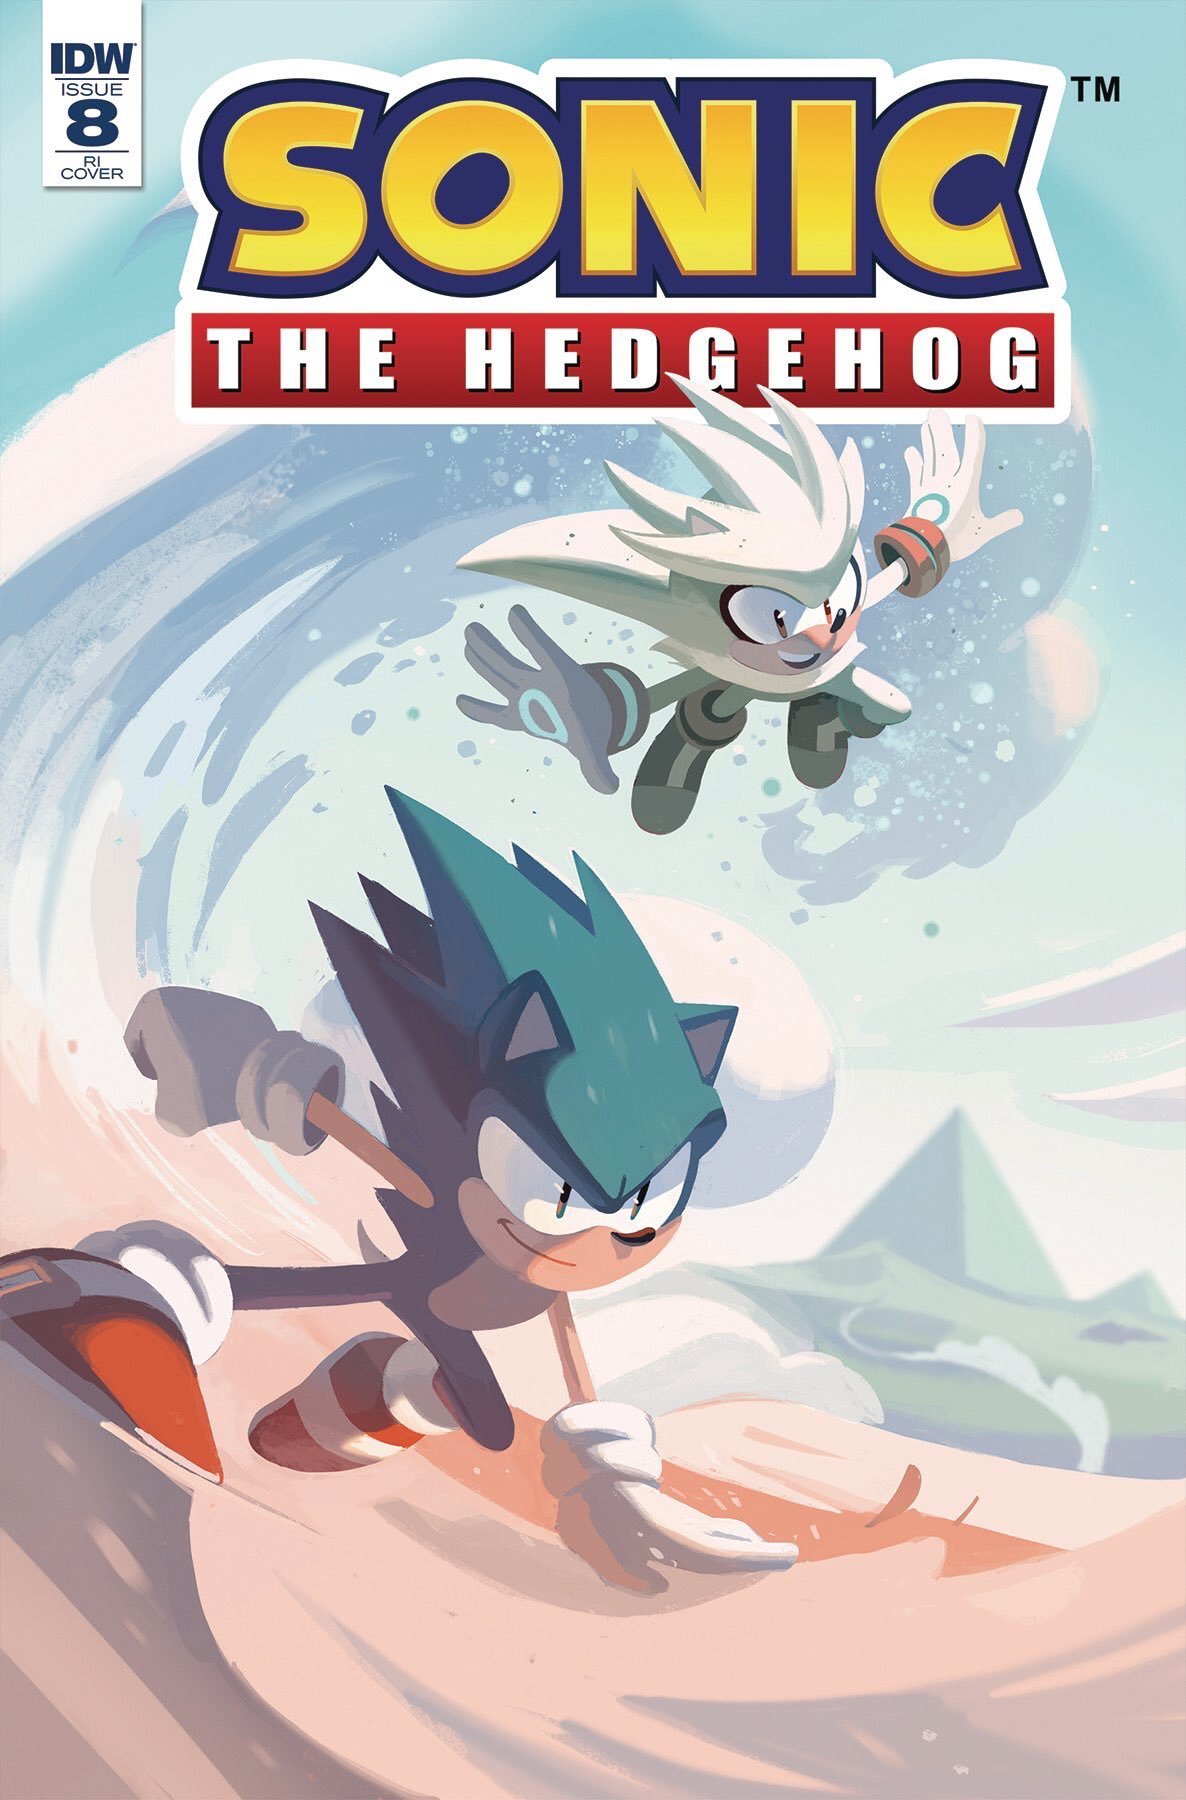 Sonic the Hedgehog 008 (August 2018) (retailer incentive)